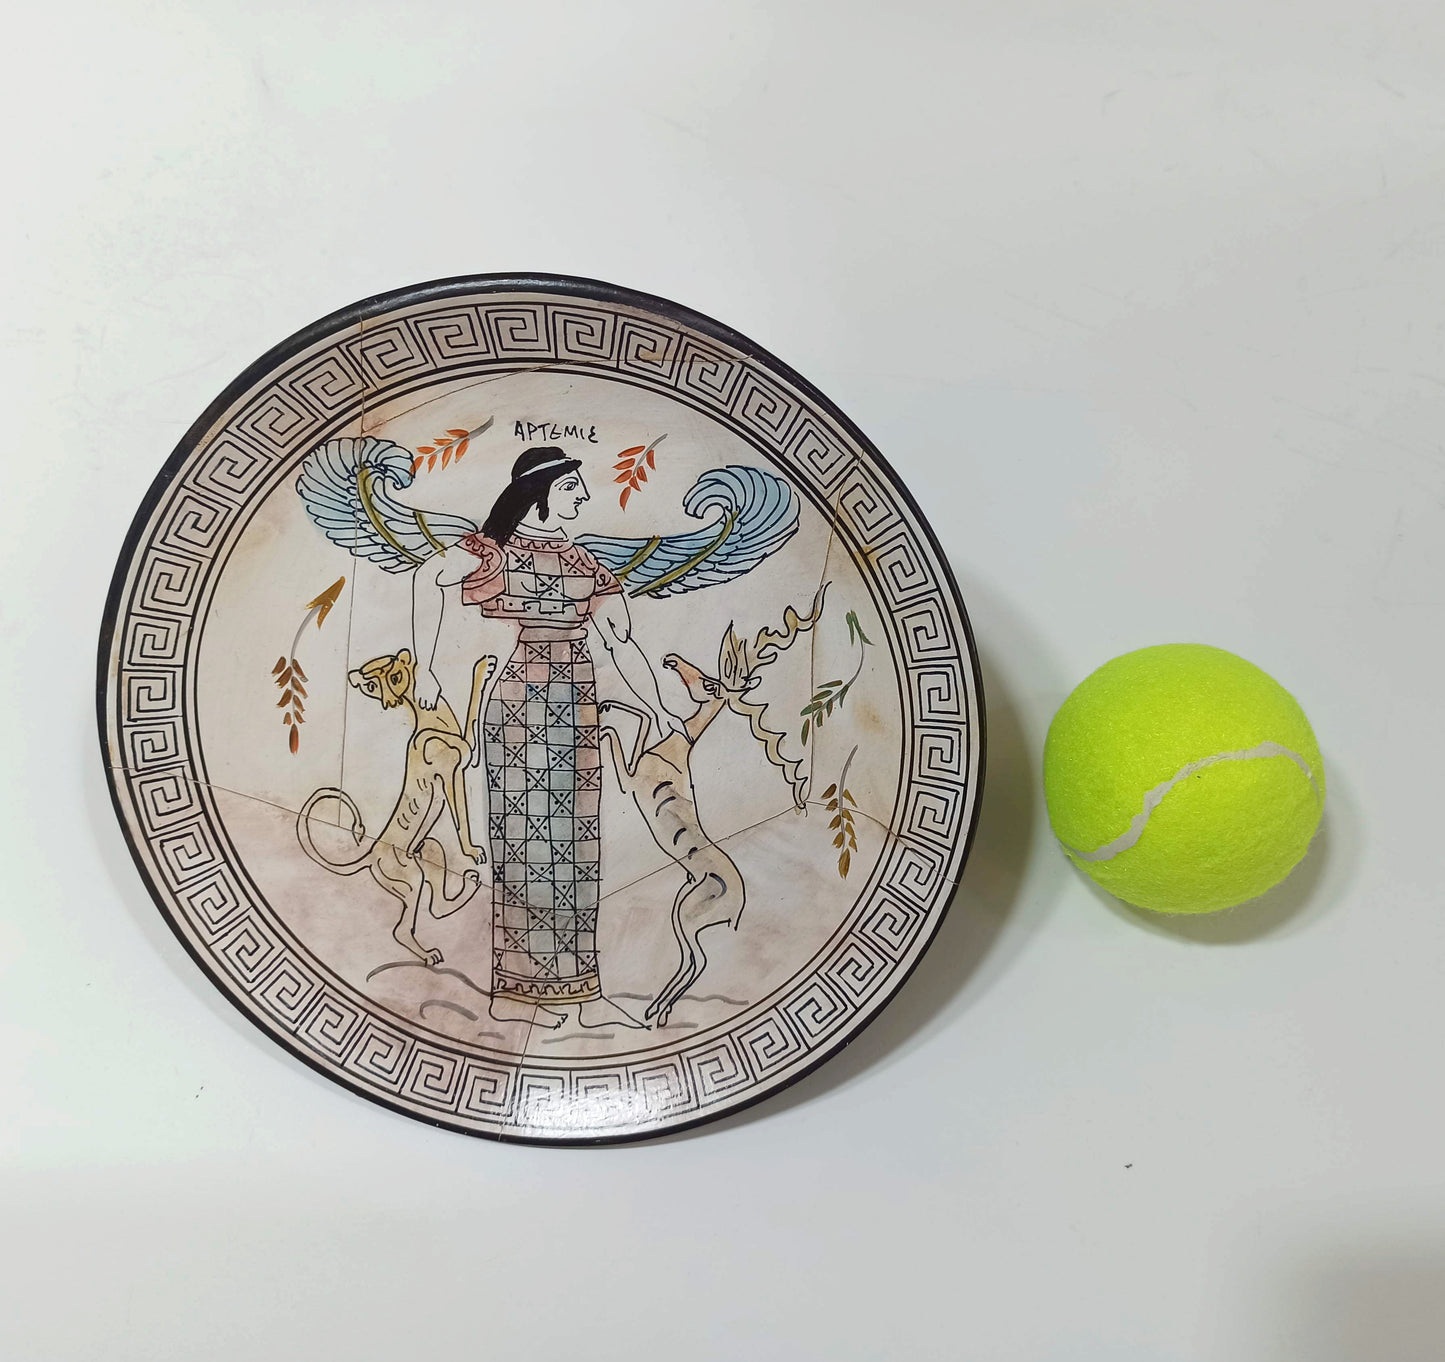 Artemis Diana - Greek Roman Goddess of Hunt, the Wilderness, Wild animals, the Moon and Chastity - Crackle Look - Ceramic plate - Handmade